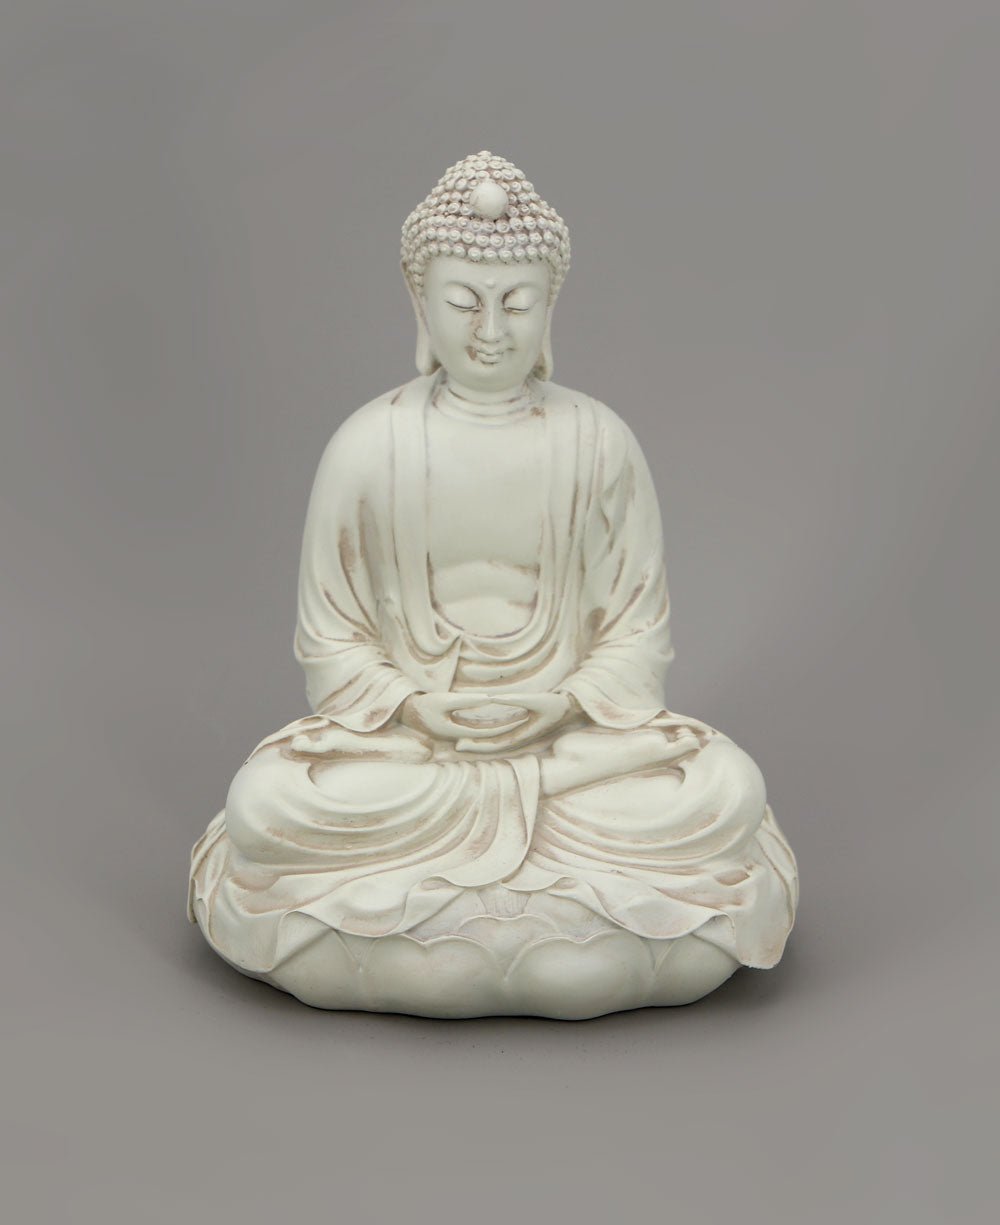 Serenity Buddha in Meditation Statue, 6.5 Inches Tall - Sculptures & Statues